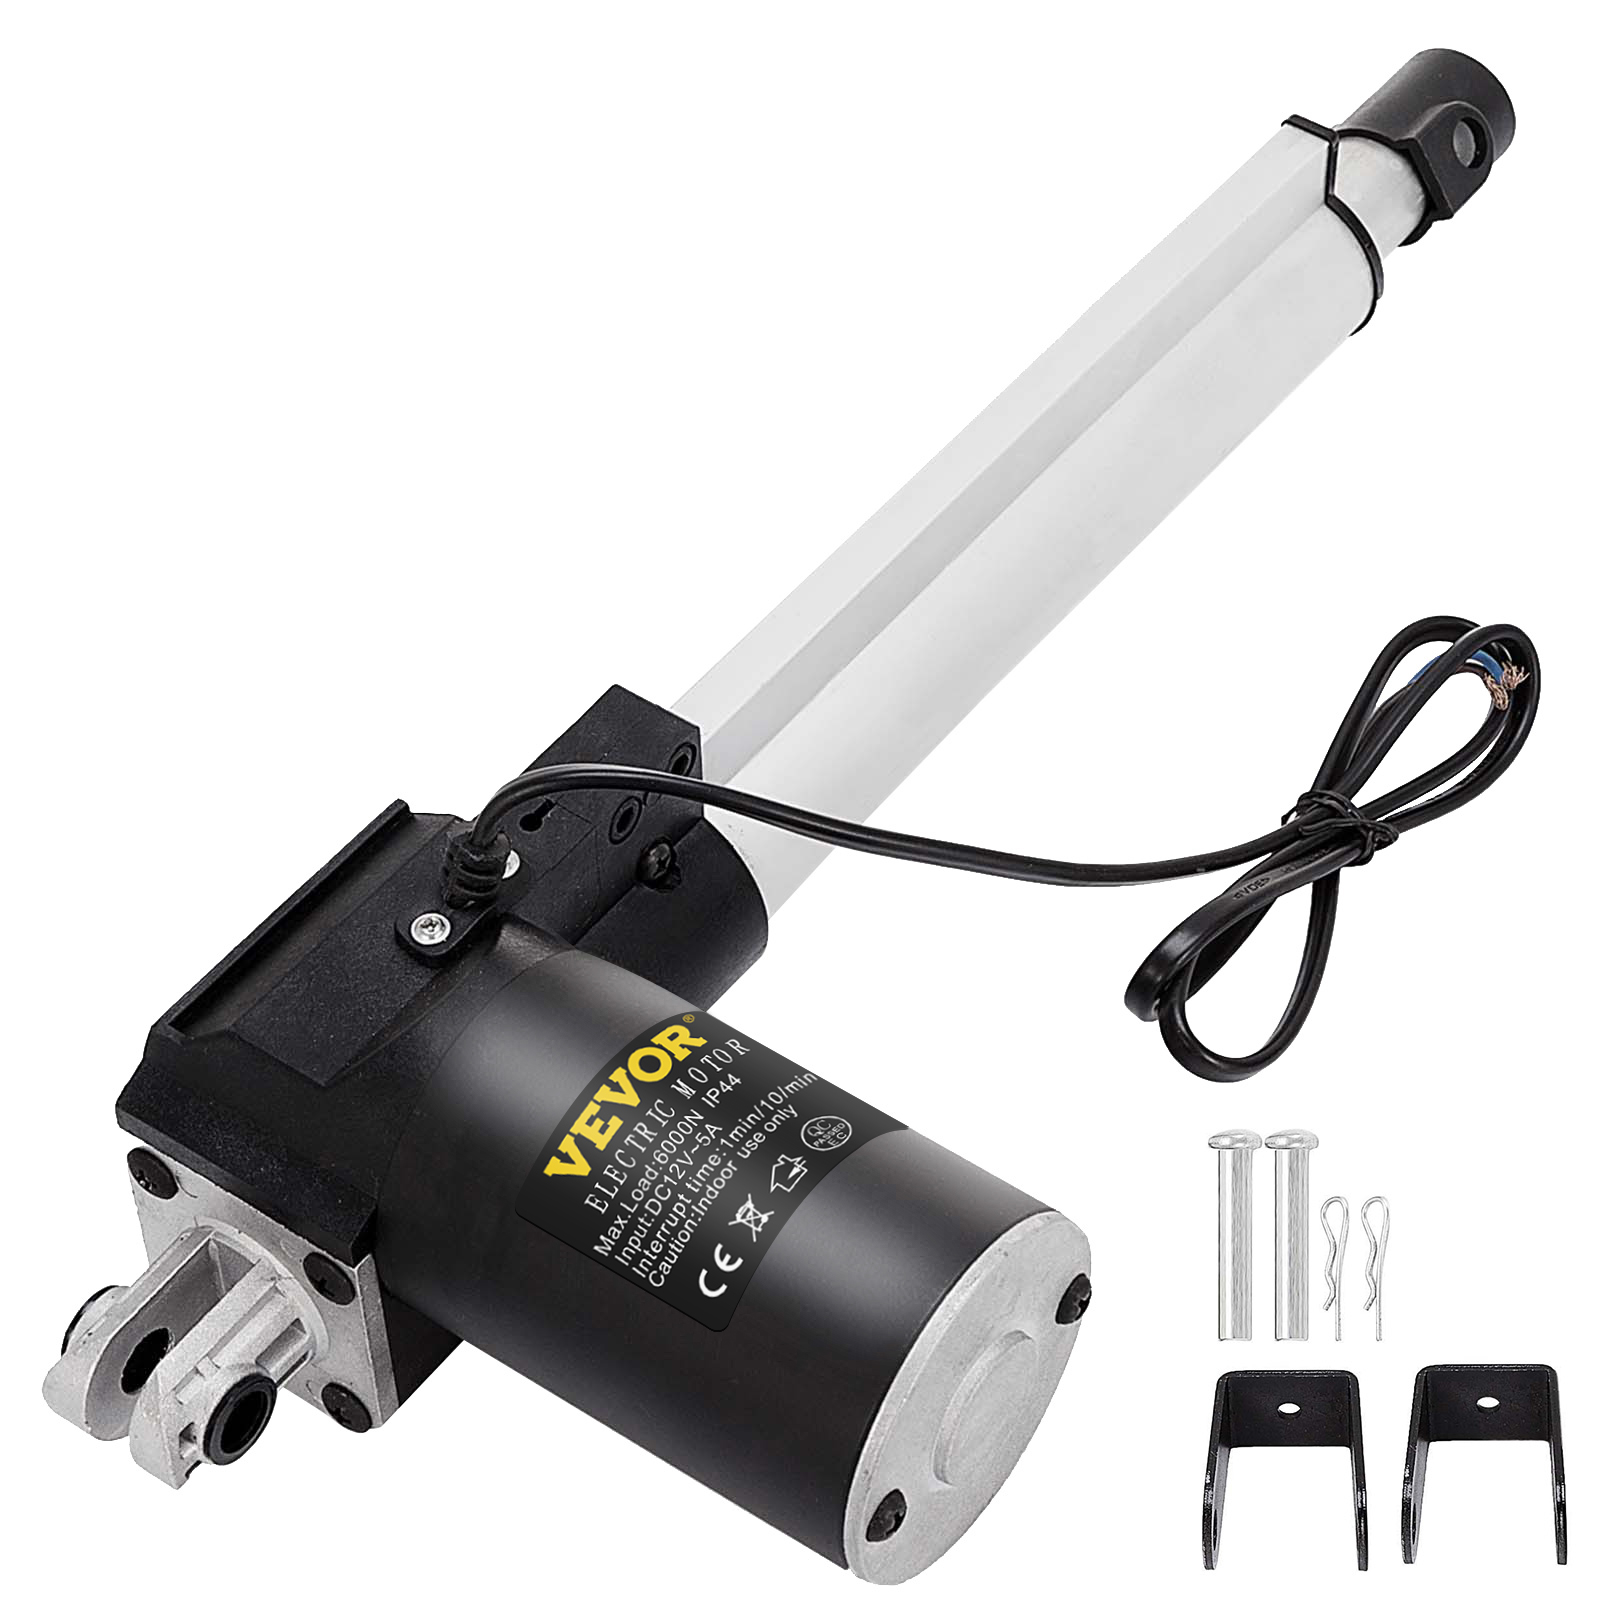 6" Inch Stroke Linear Actuator 6000N/1320lbs Pound Max Lift 12V Volt DC Motor от Vevor Many GEOs